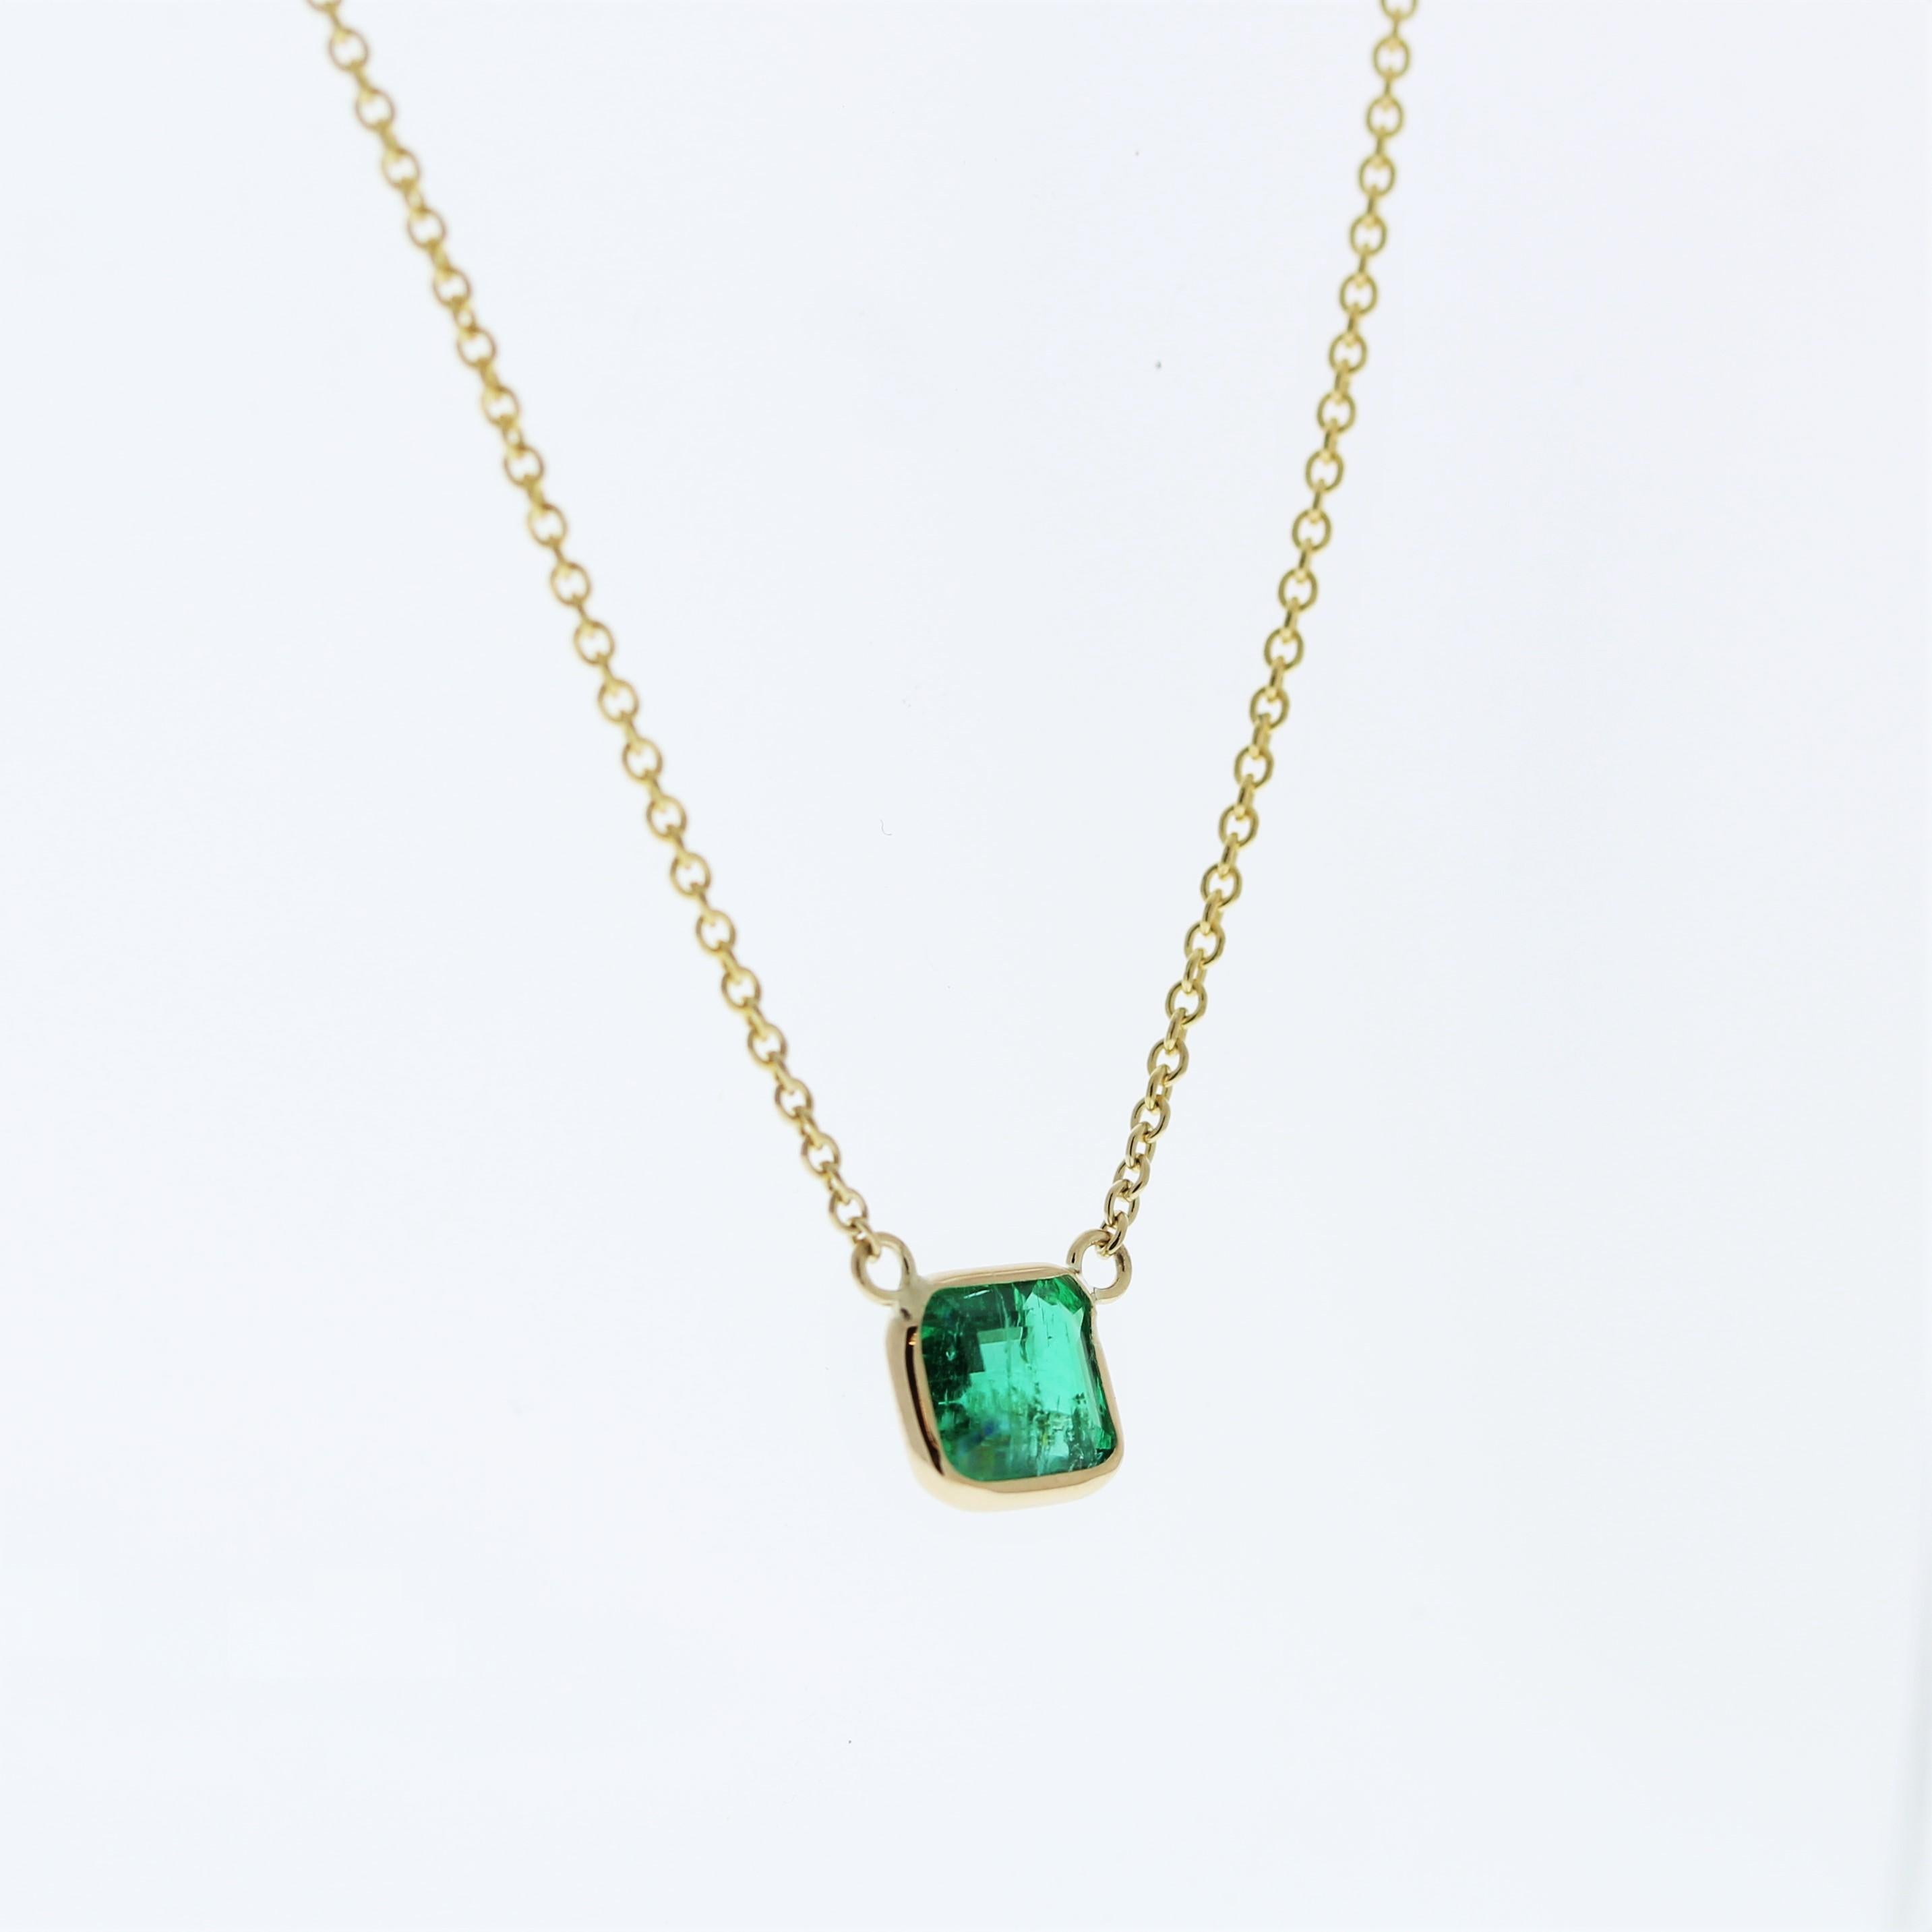 The necklace features a 1.04-carat Asscher-cut green emerald set in a 14 karat yellow gold pendant or setting. The distinctive Asscher cut and the vivid green color of the emerald against the yellow gold setting are likely to create an elegant and